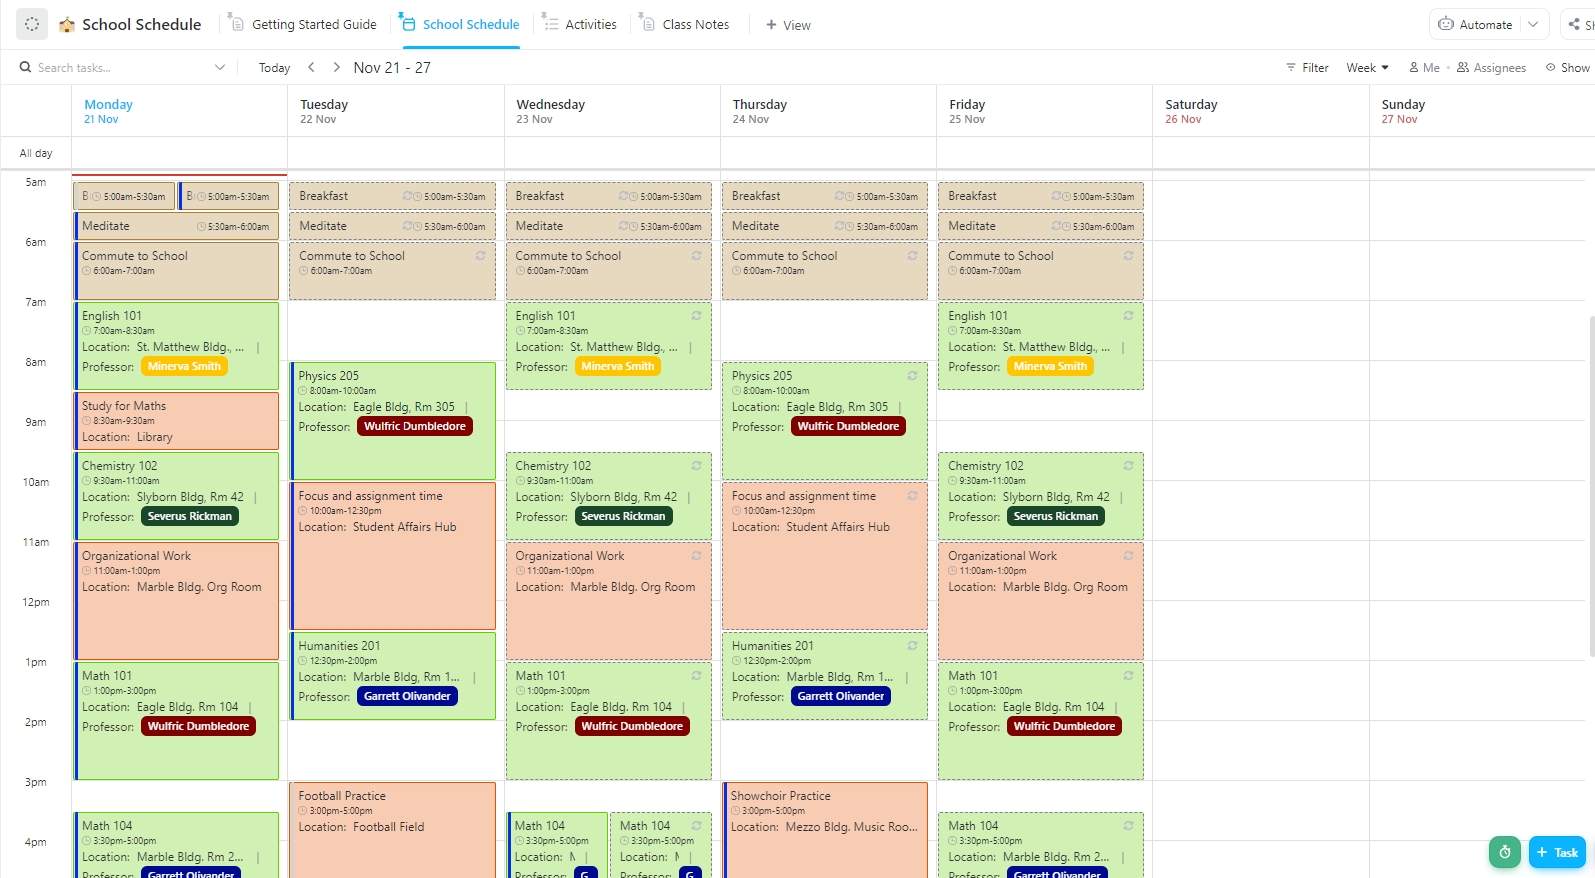 Being organized is important for the student who is on-the-go. To ensure that you are maximizing your time, use this School Schedule template.